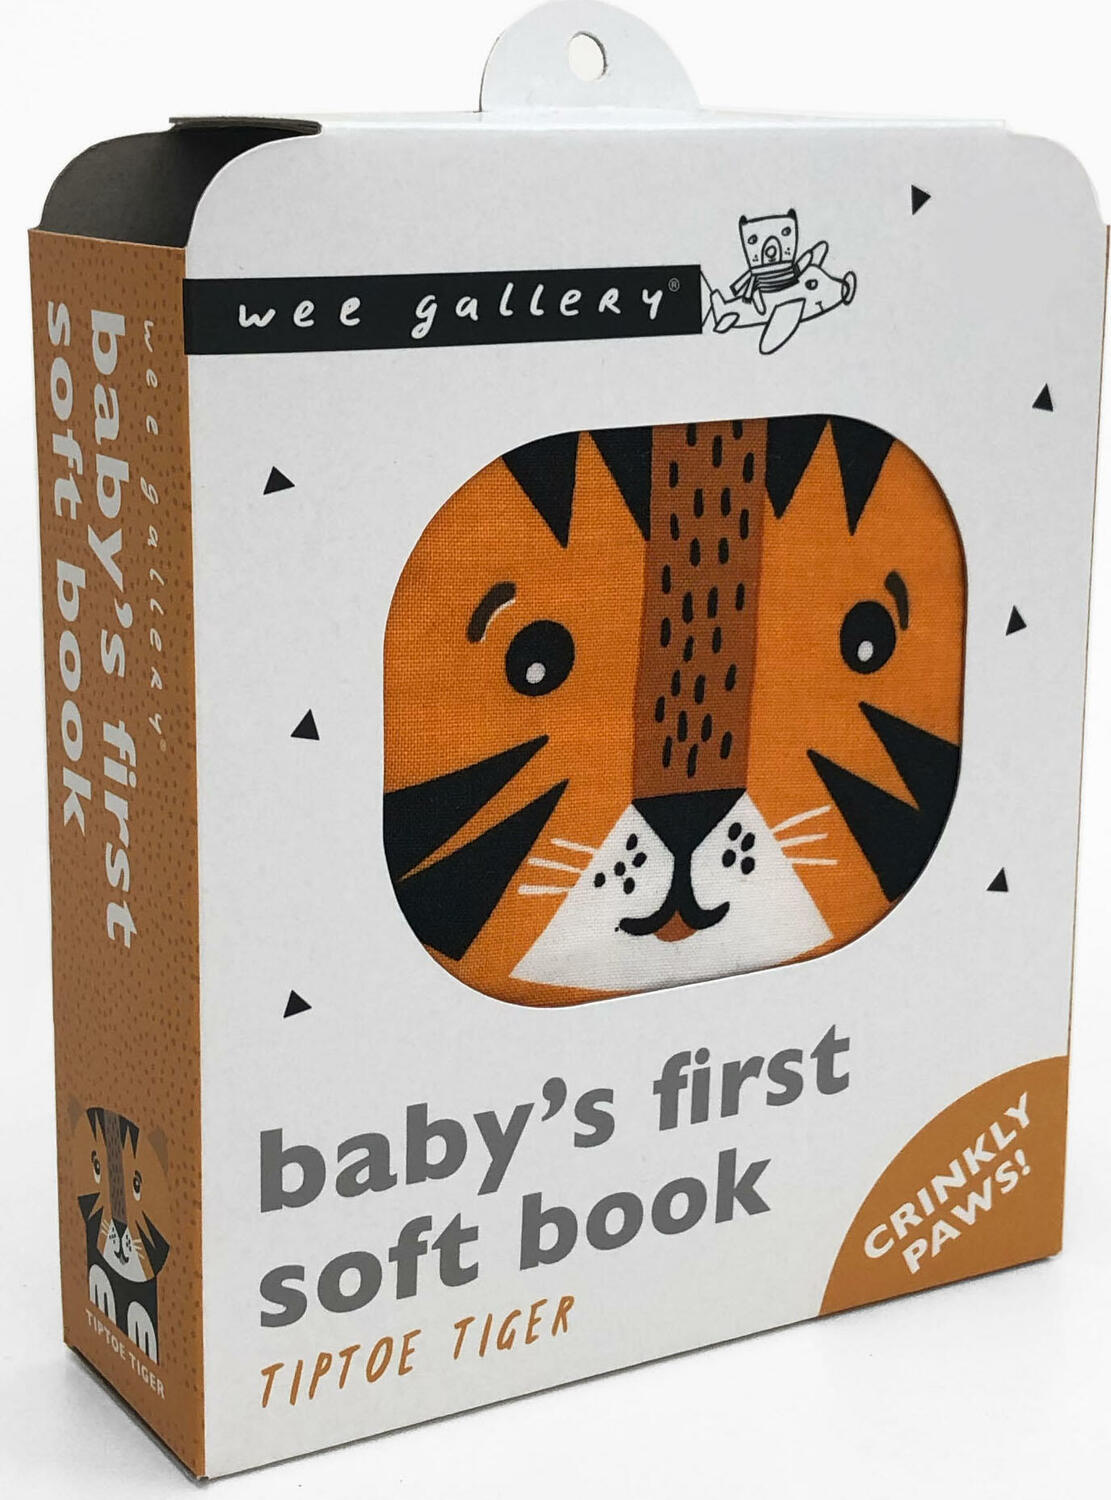 Tiptoe Tiger (2020 Edition): Baby's First Soft Book